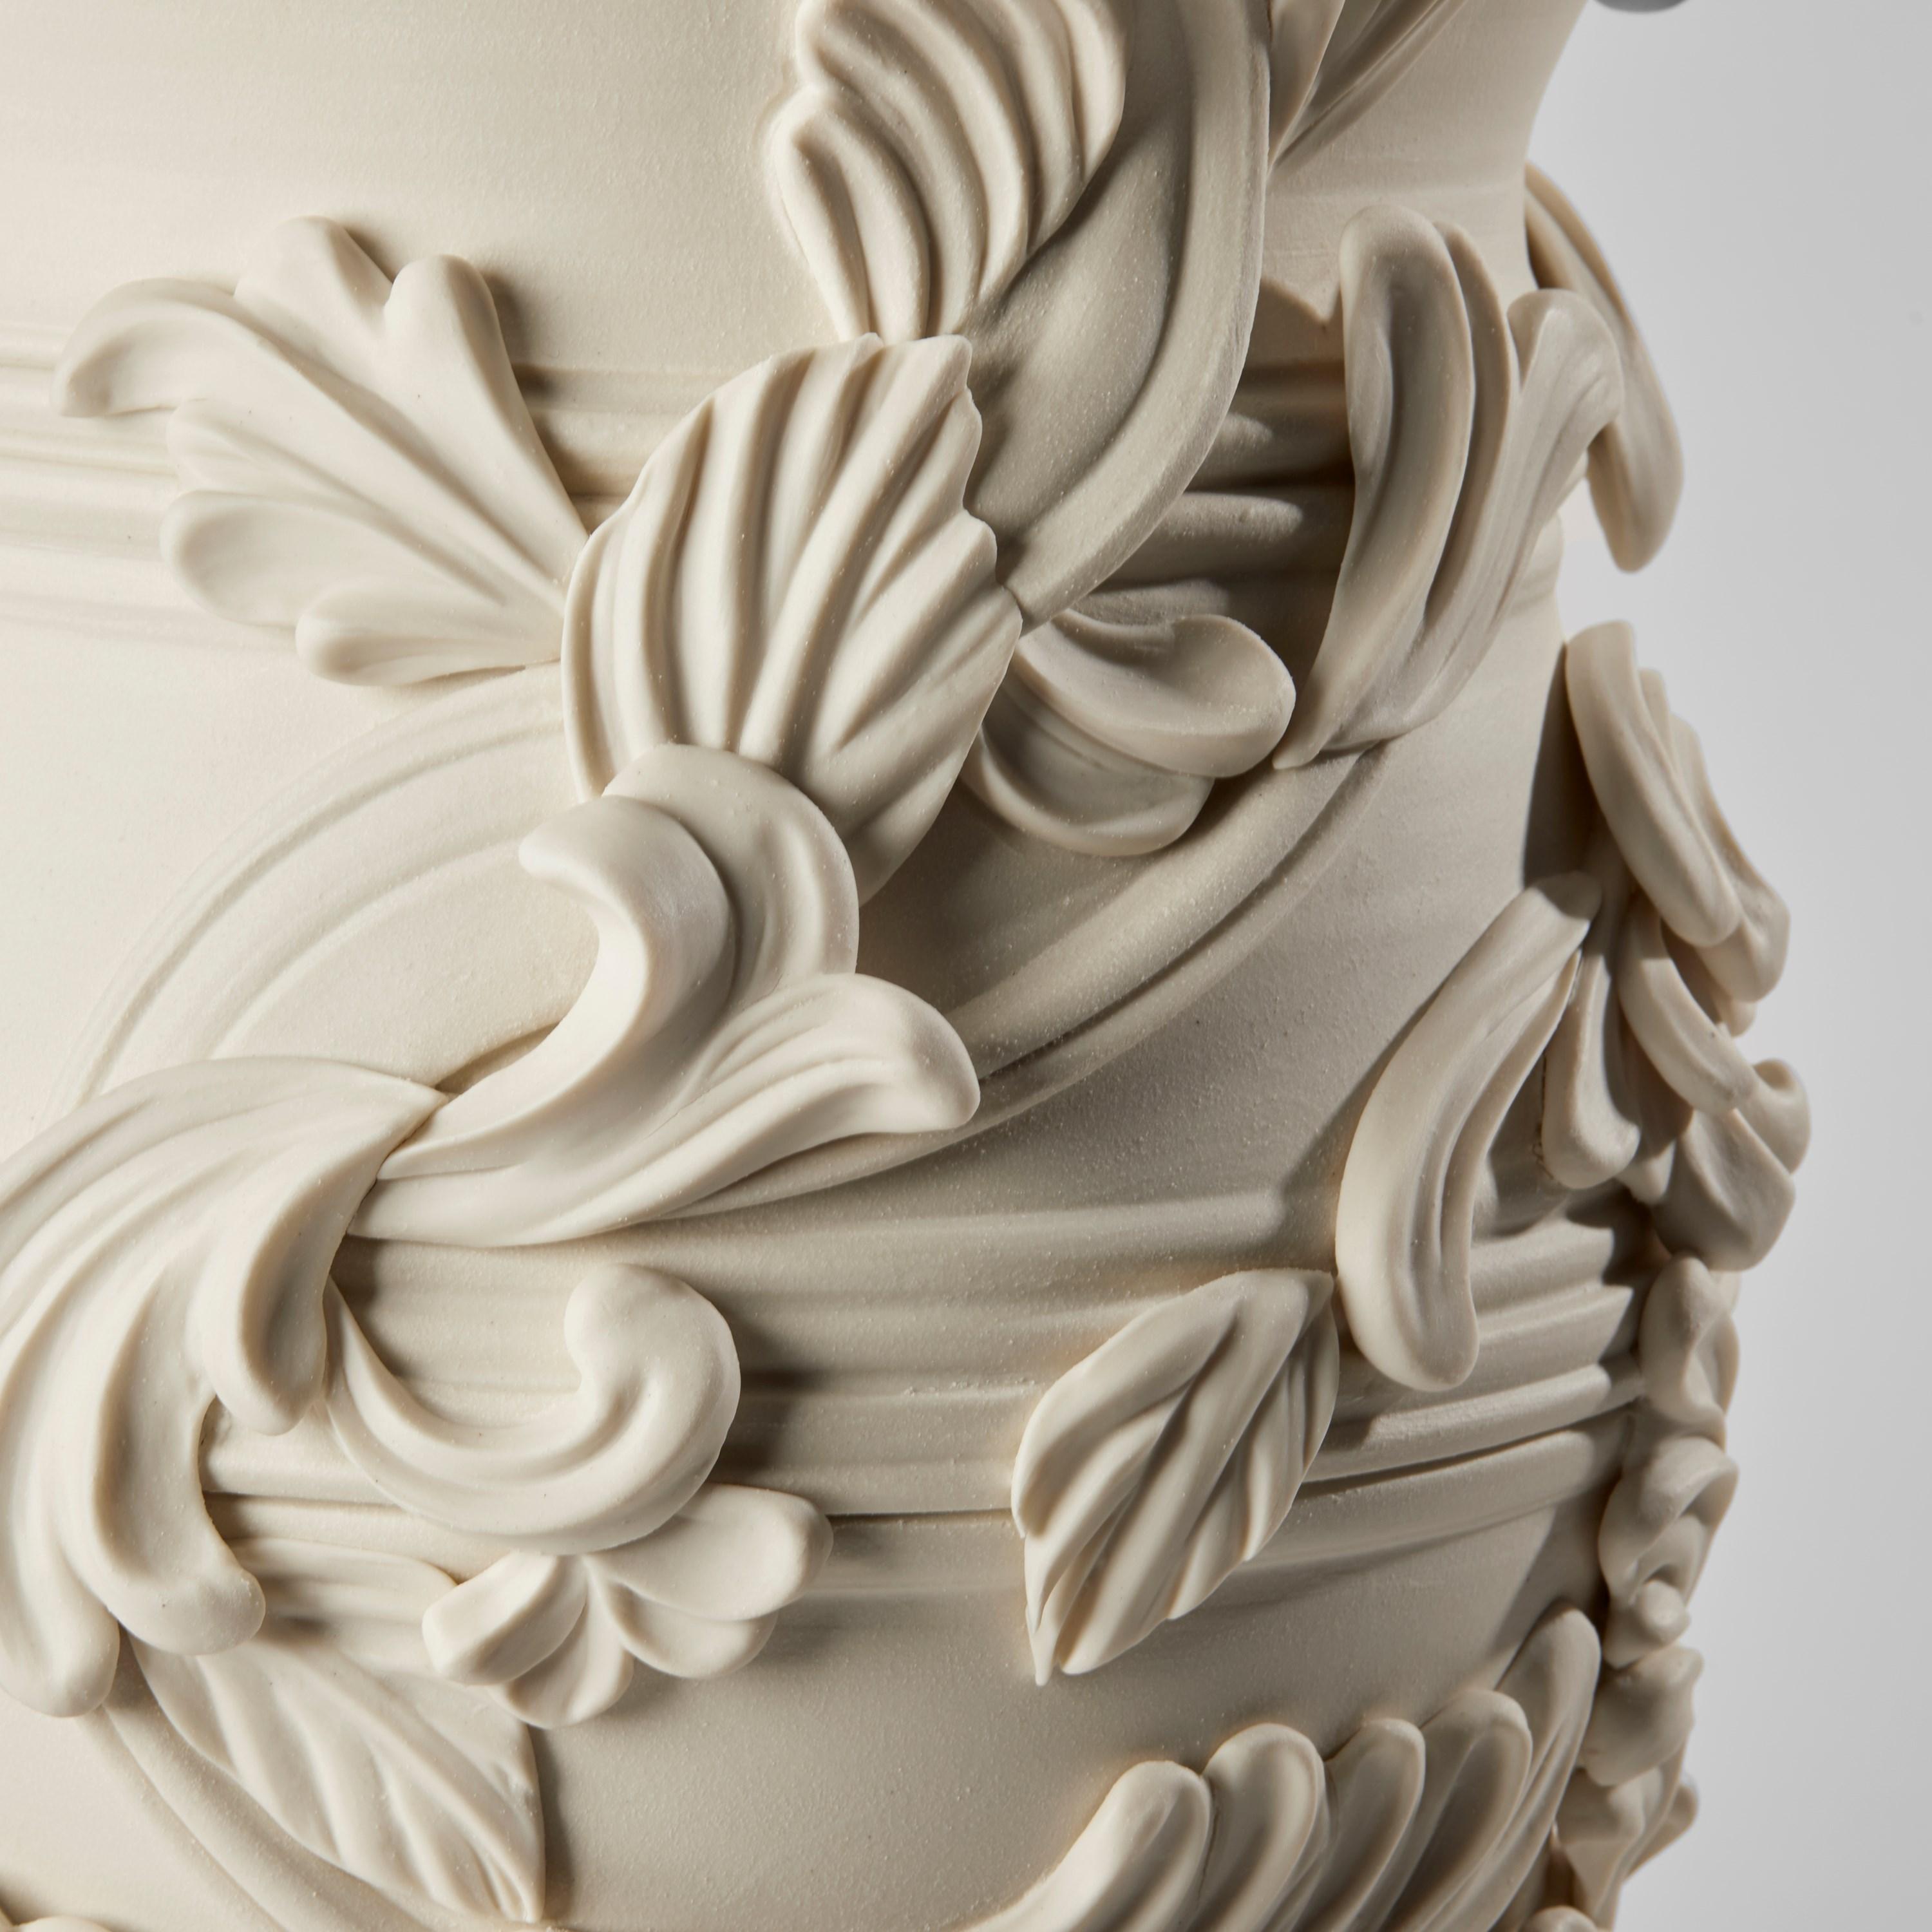 Contemporary Promenade IV, a Unique Ceramic Sculptural Tall Vase in Porcelain by Jo Taylor For Sale